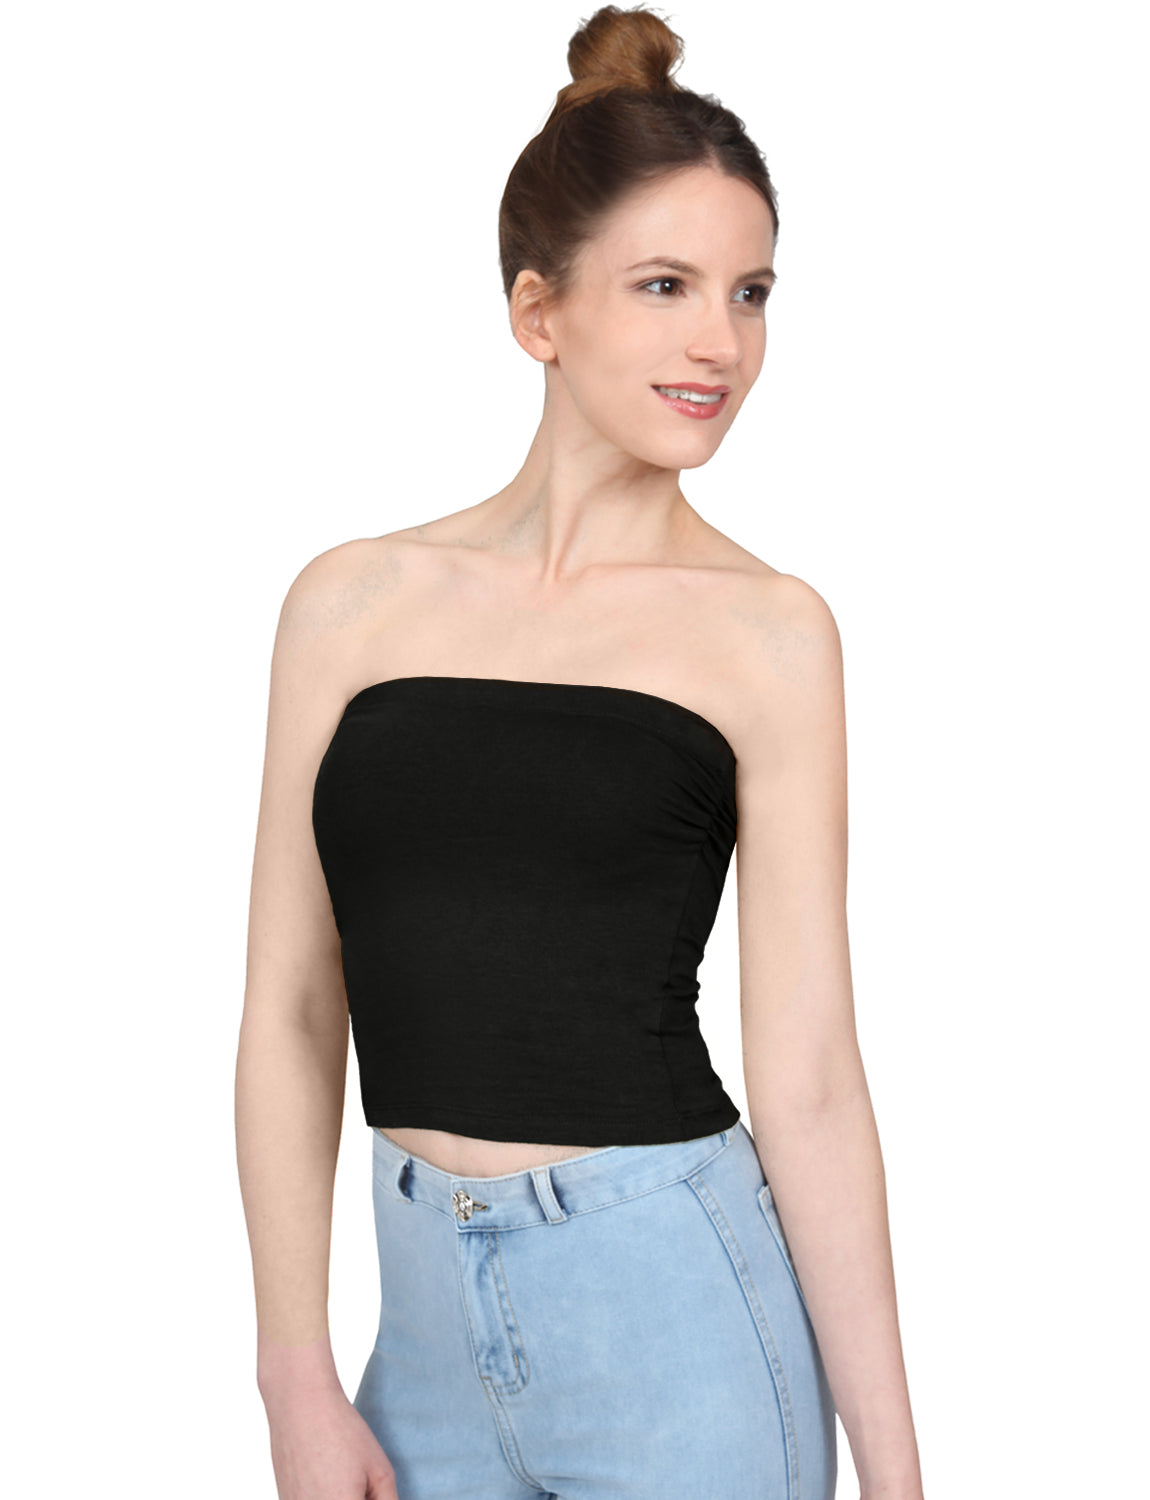 Strapless Tube Top / Crop Top With Built-In Bra